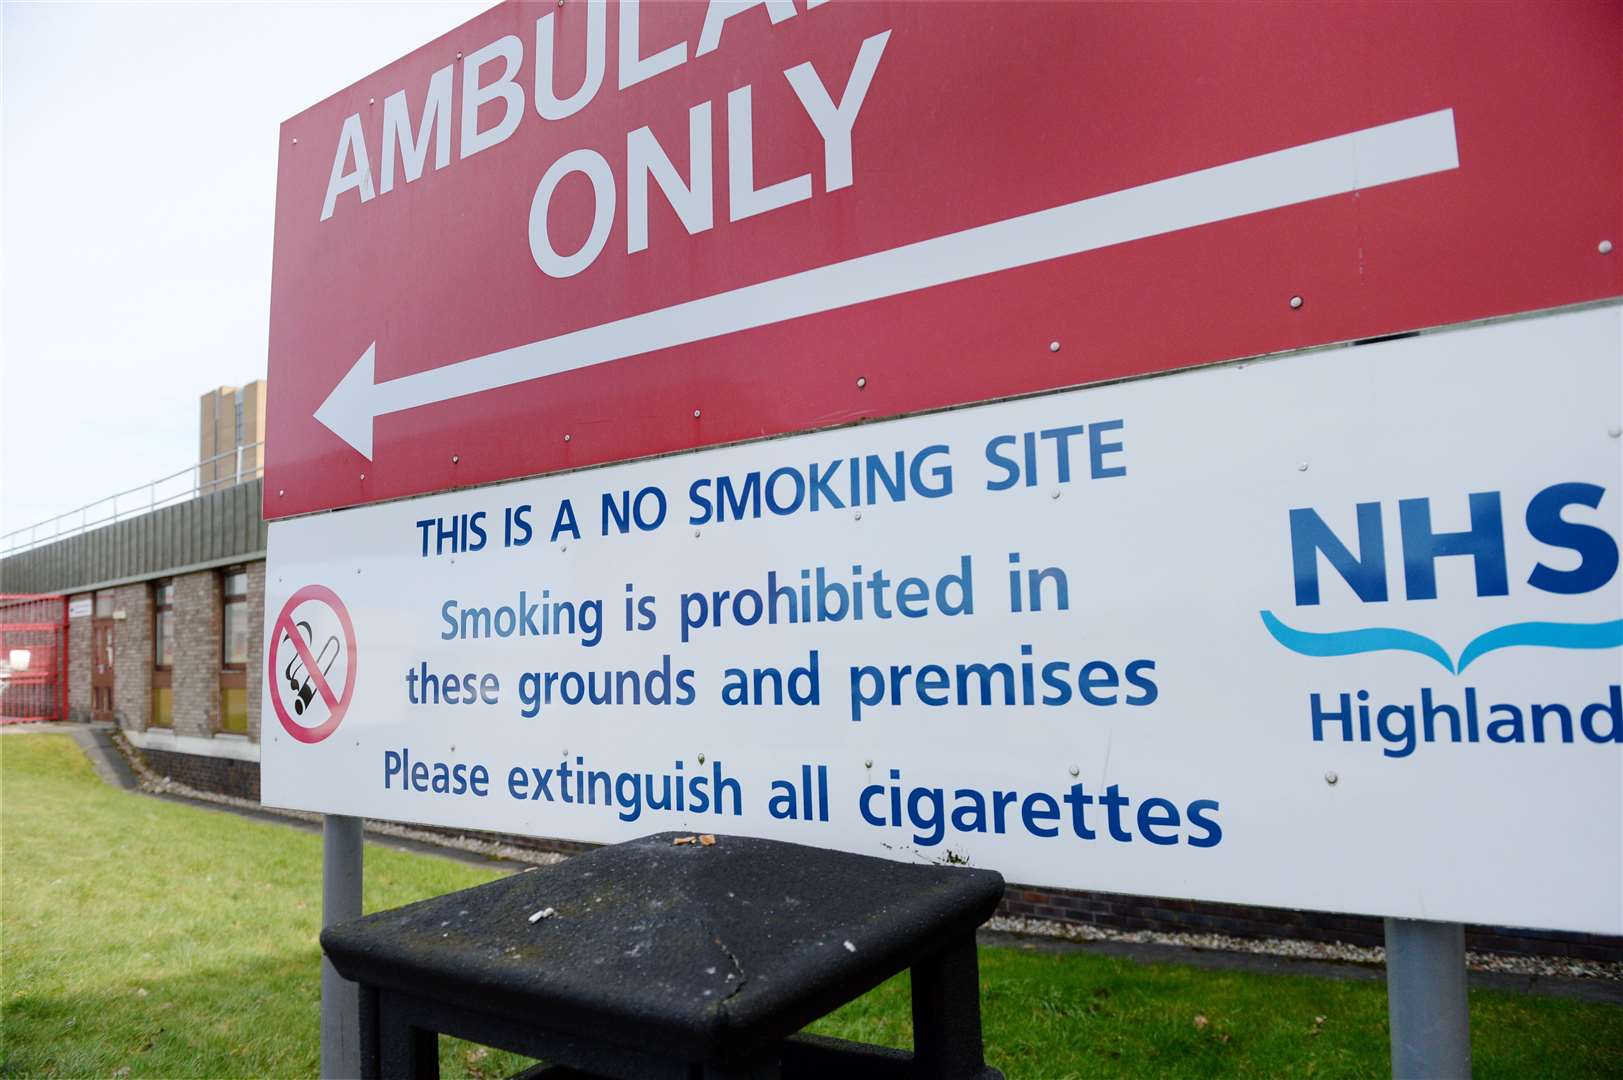 NHS sites should be a smoke-free zone.